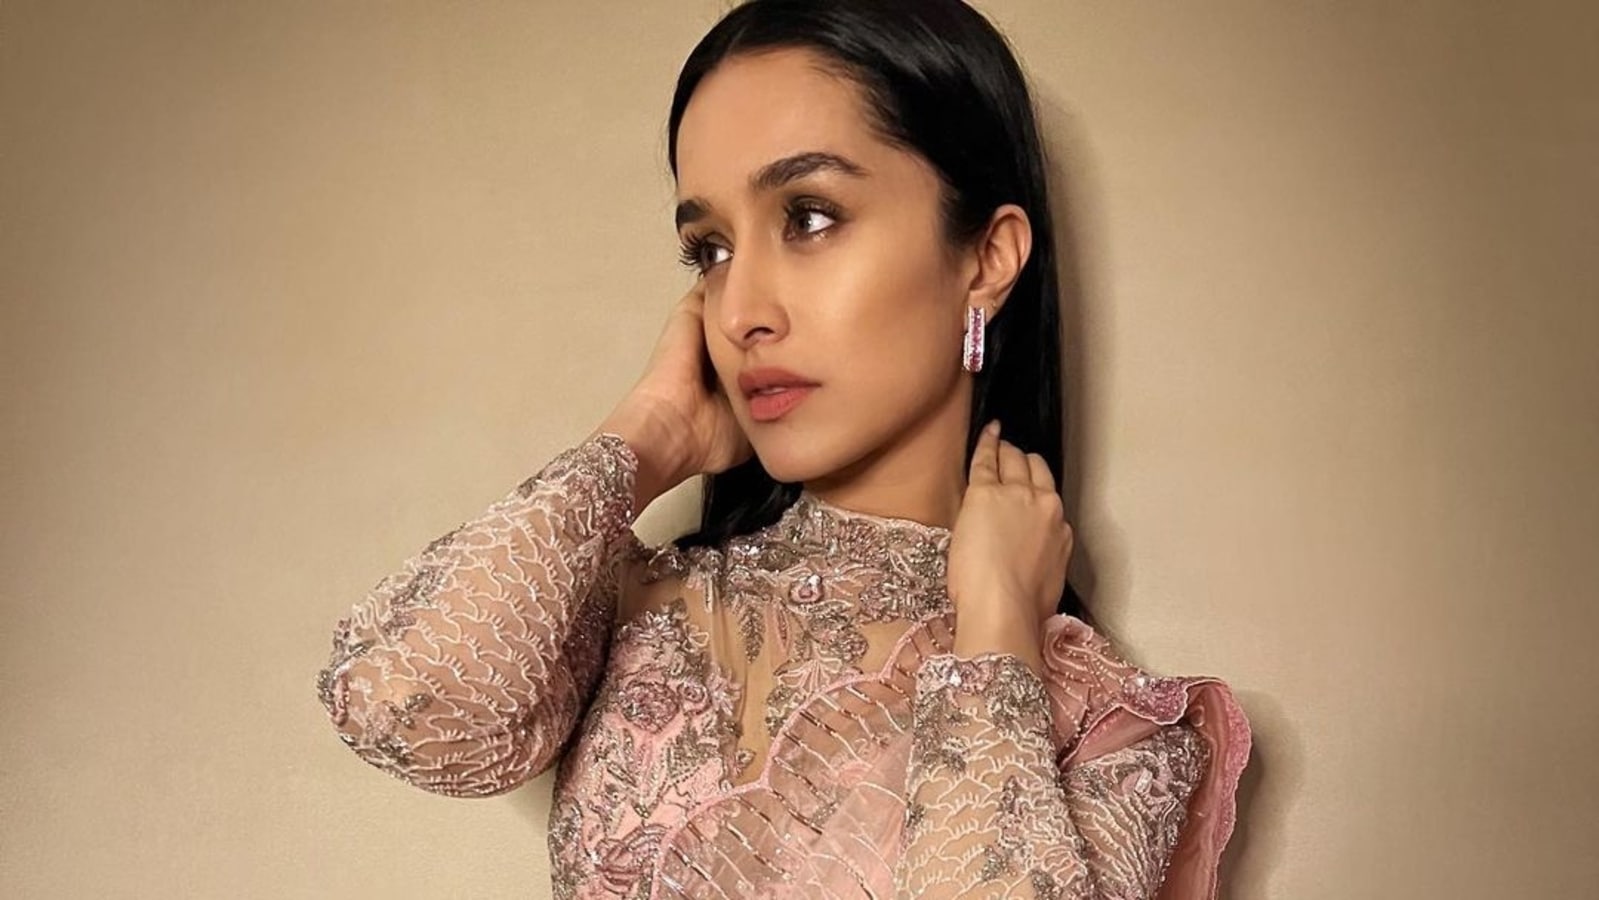 Shraddha signs for Baaghi 3 : The Tribune India